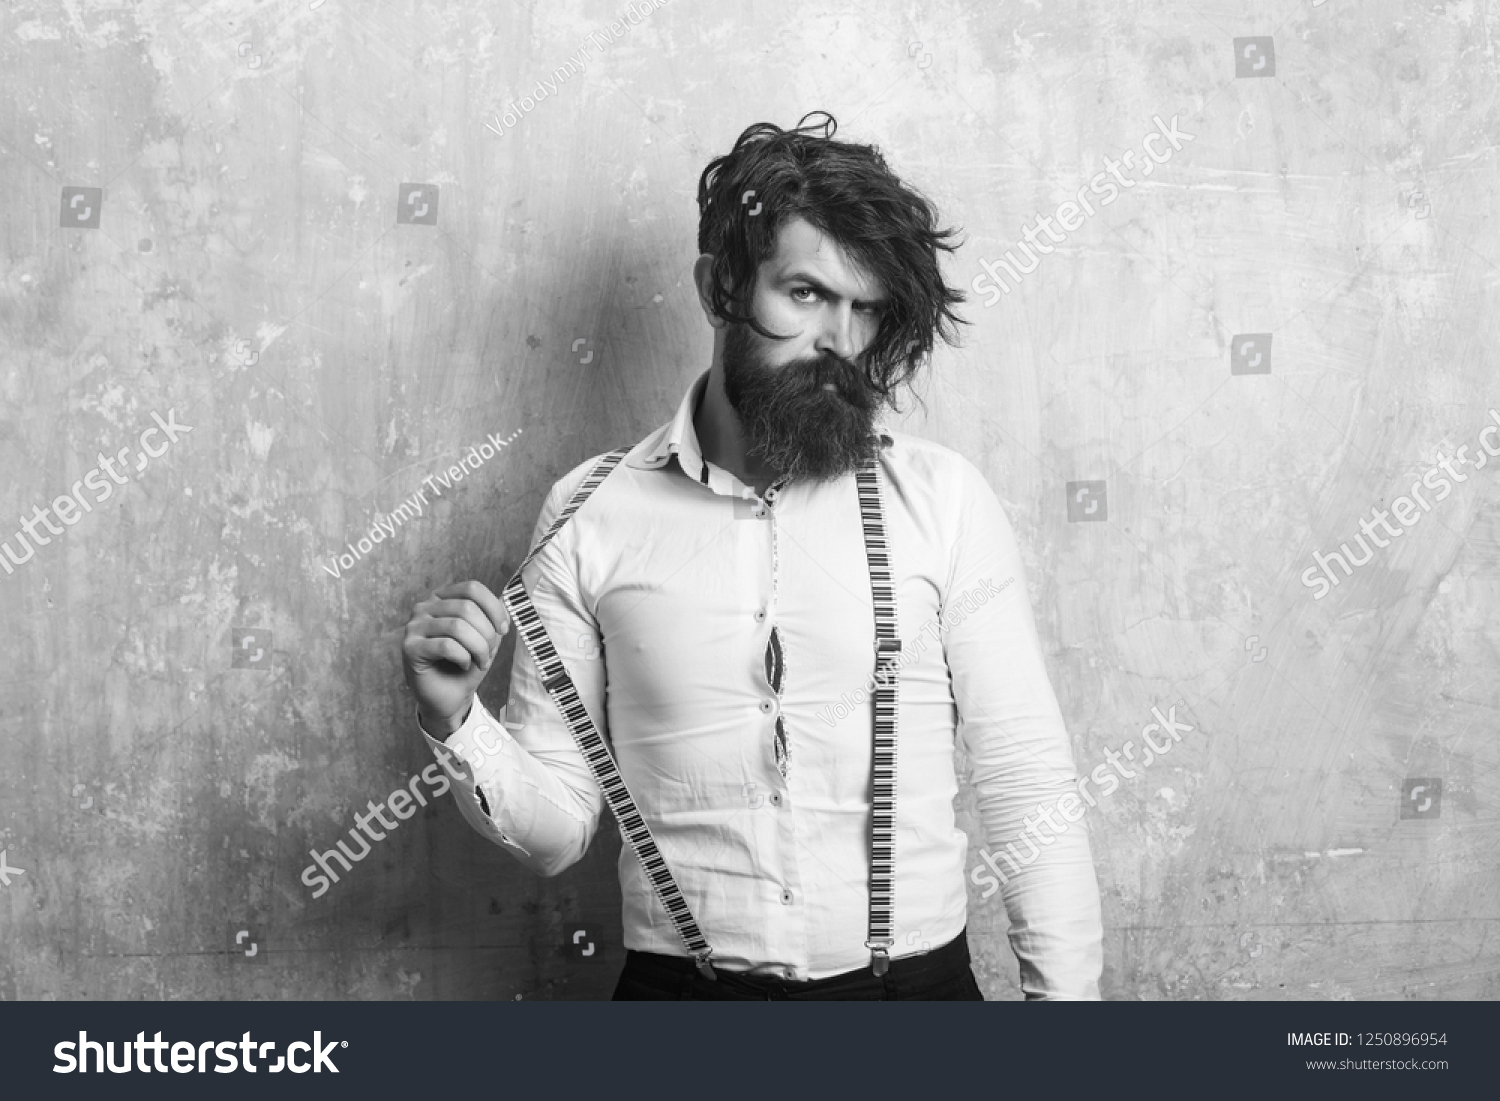 Business fashion and beauty. Fashion model with stylish hair. Guy or businessman at textured wall. Man with long beard and mustache on face. Hipster in shirt and suspenders. #1250896954